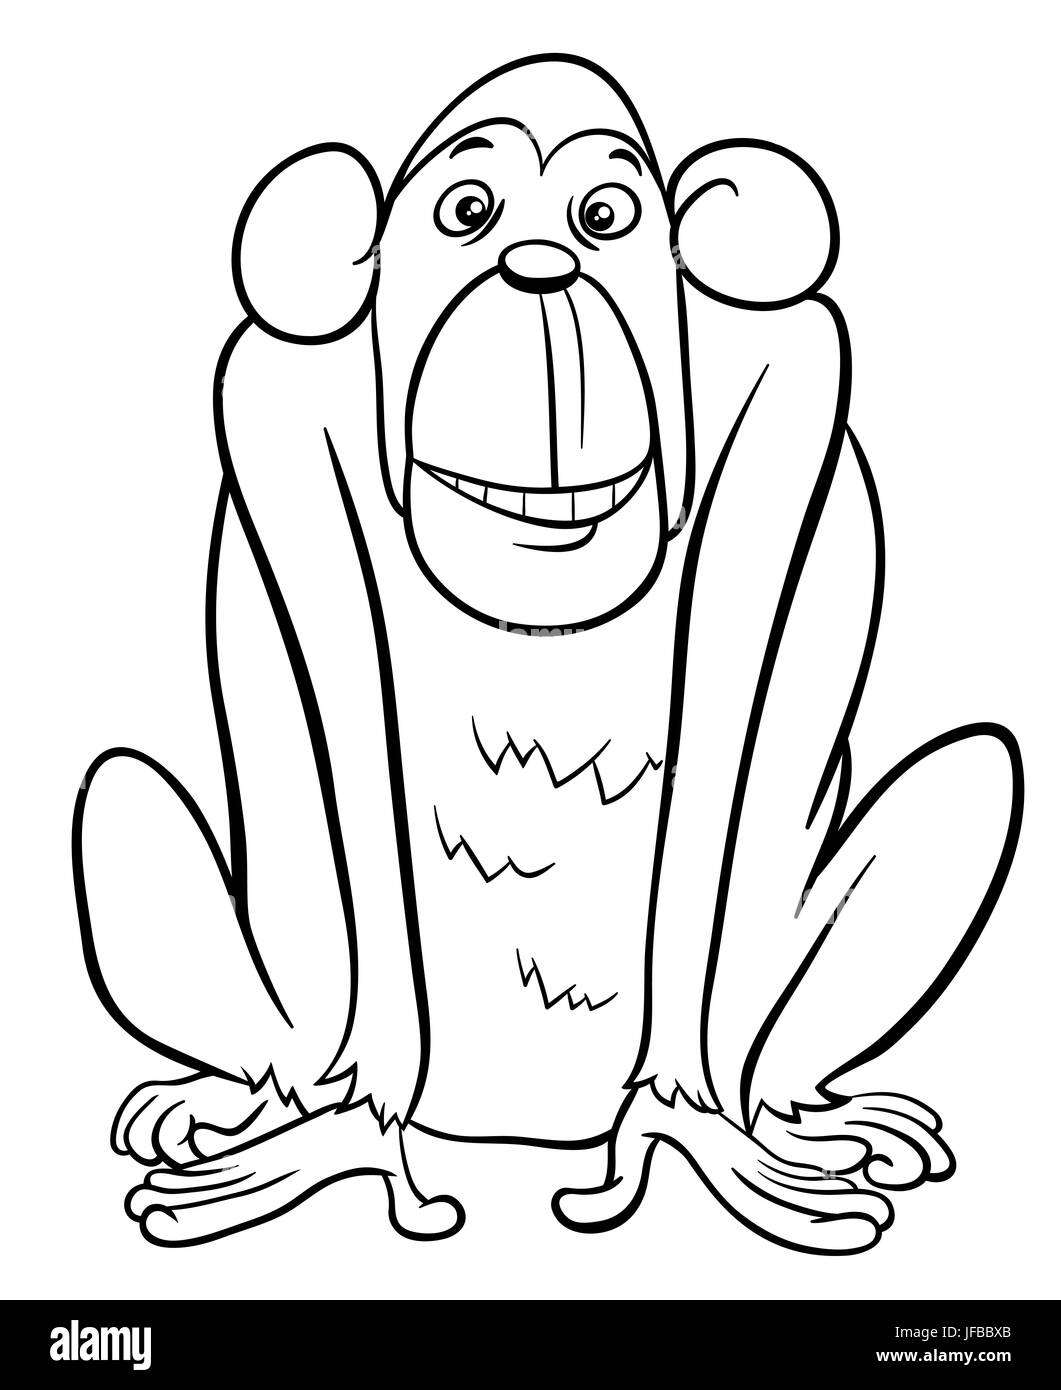 ape character coloring page Stock Photo